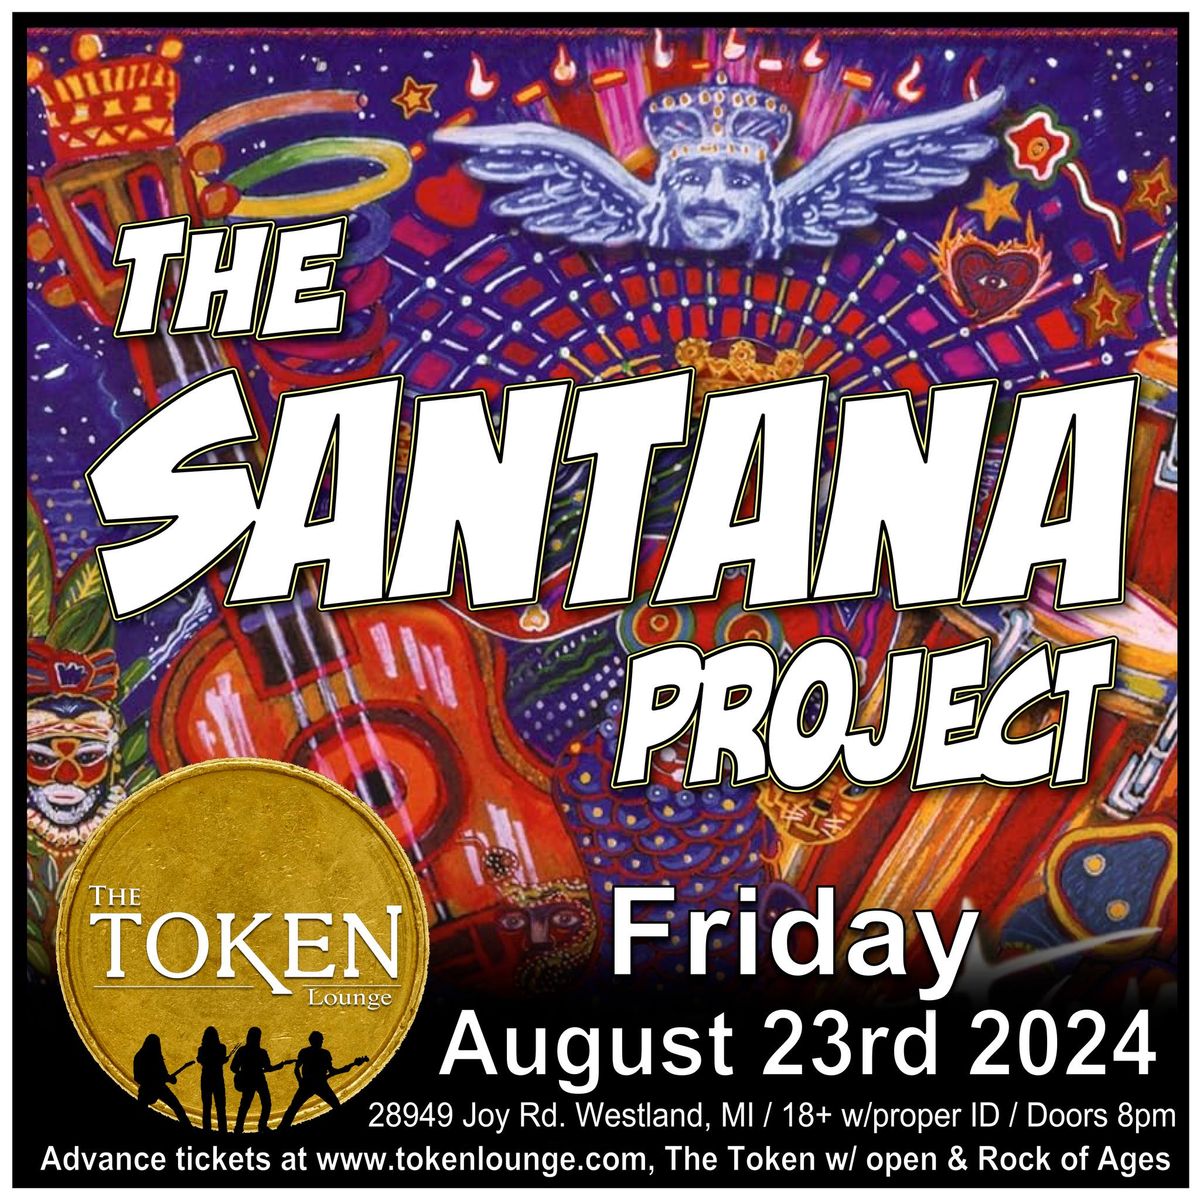 THE SANTANA PROJECT with special guest's DEEP CUT & CELEBRATING GREG'S 67TH TRIP AROUND THE SUN